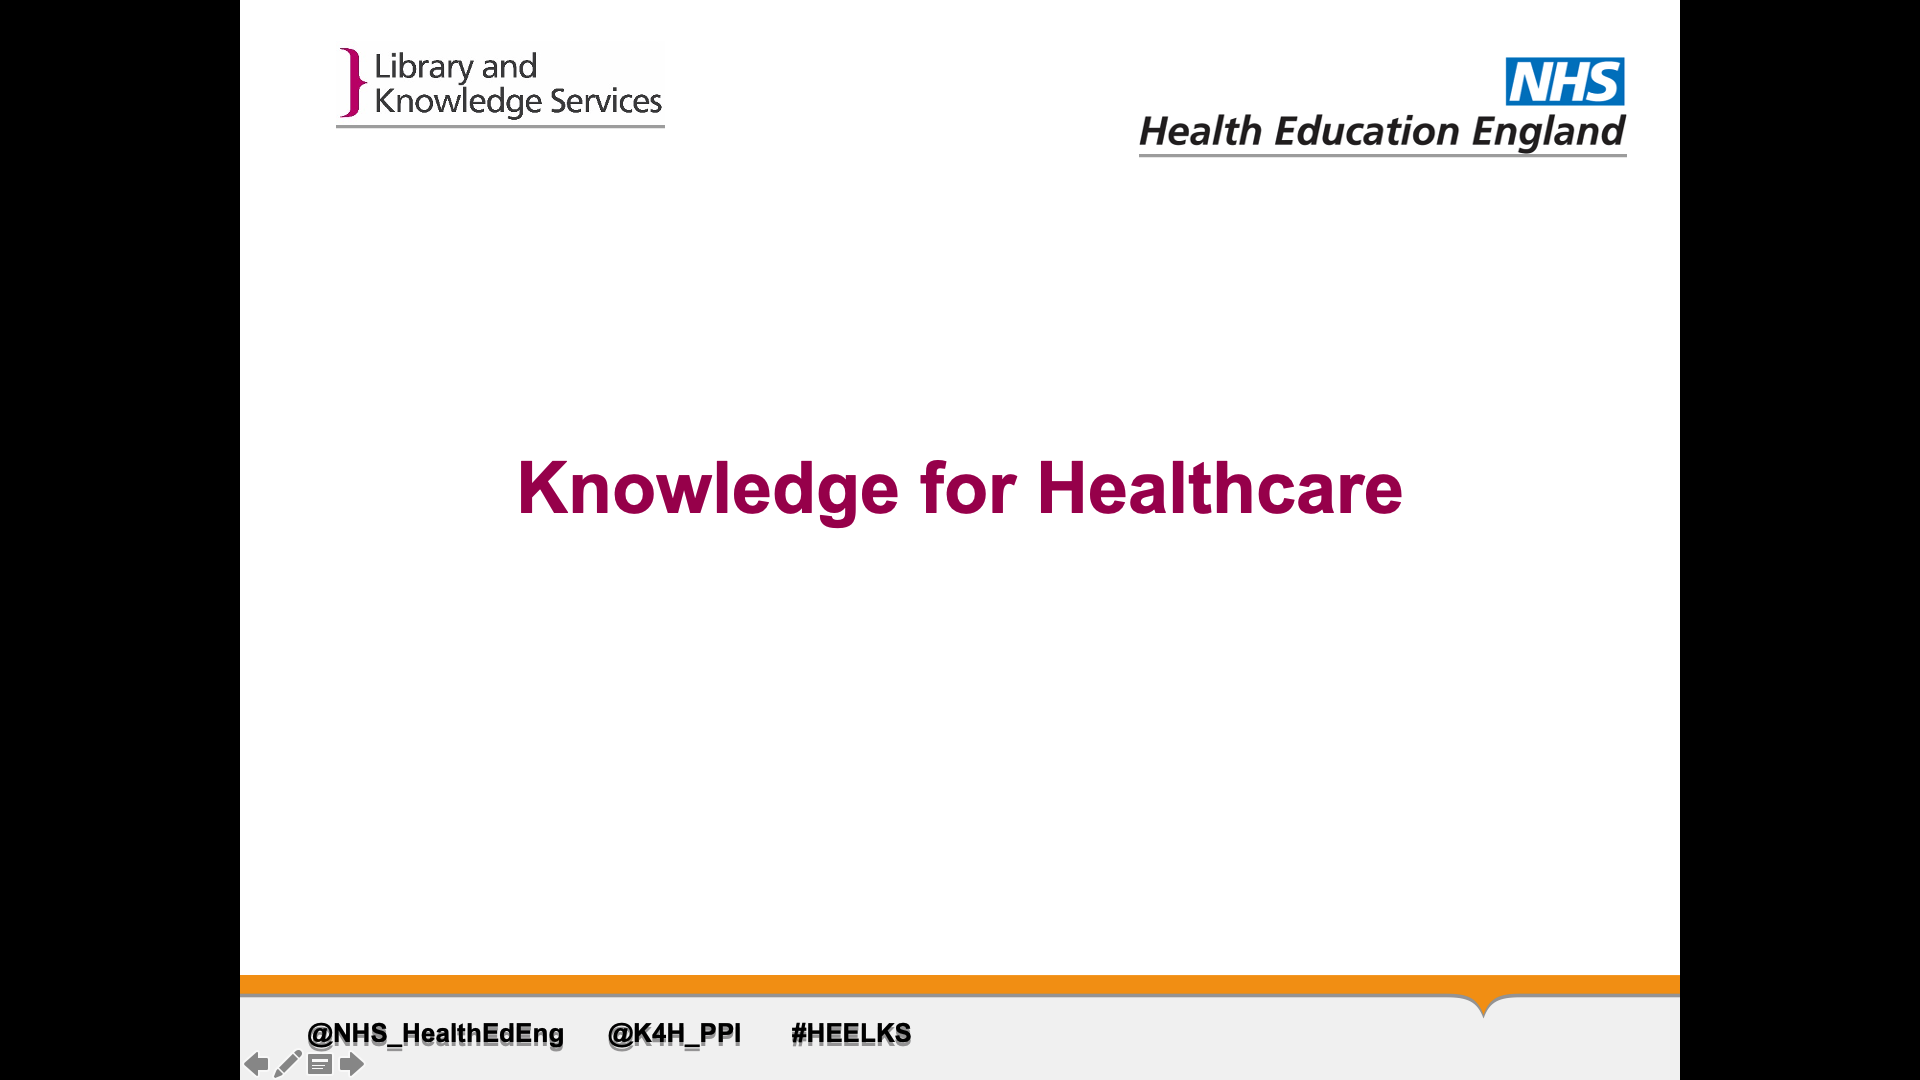 Title card: Knowledge for Healthcare